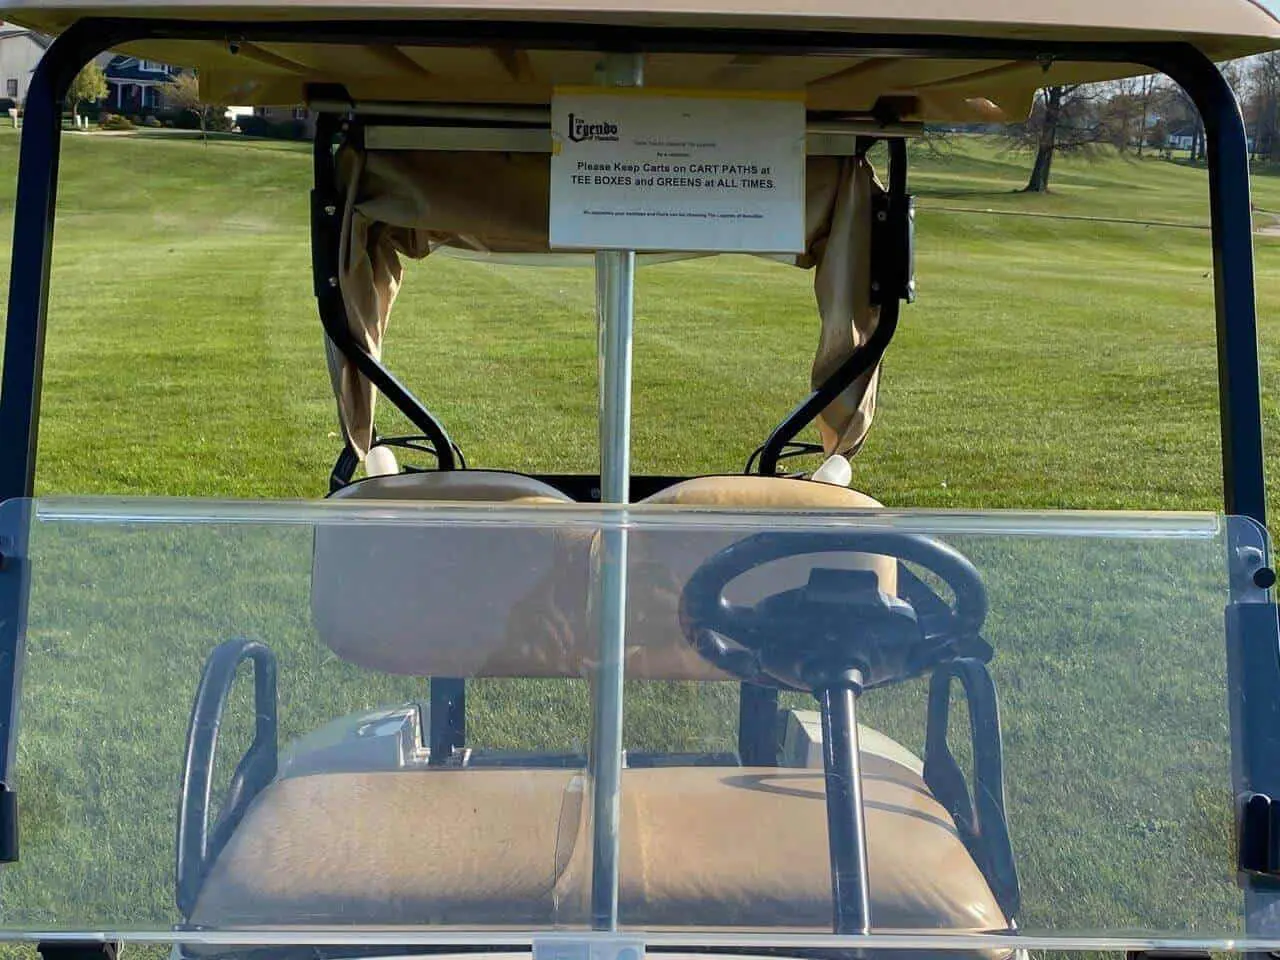 In use at Legends Golf Course